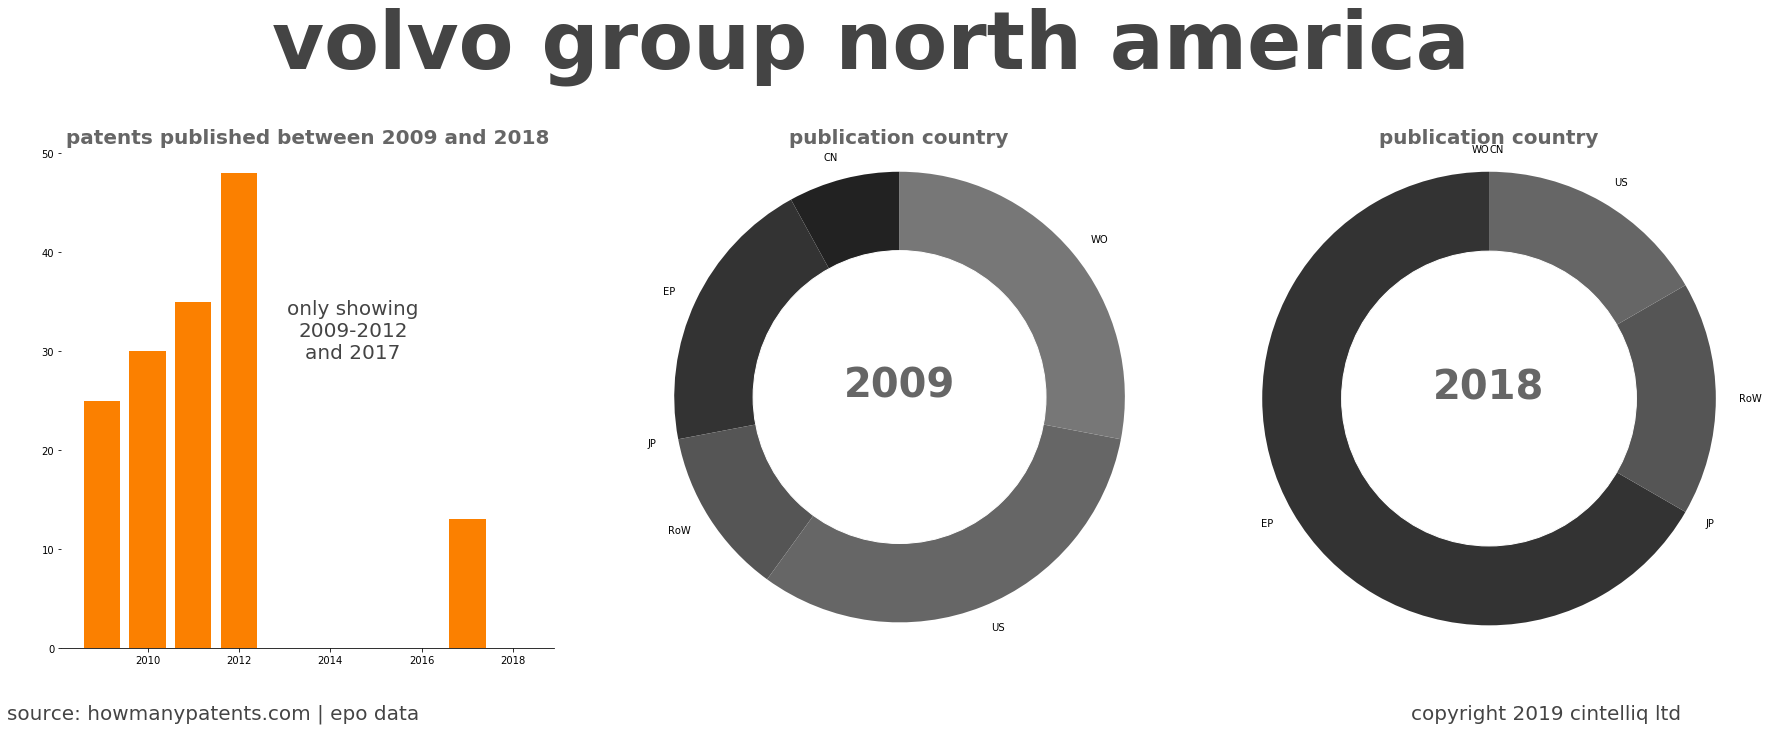 summary of patents for Volvo Group North America